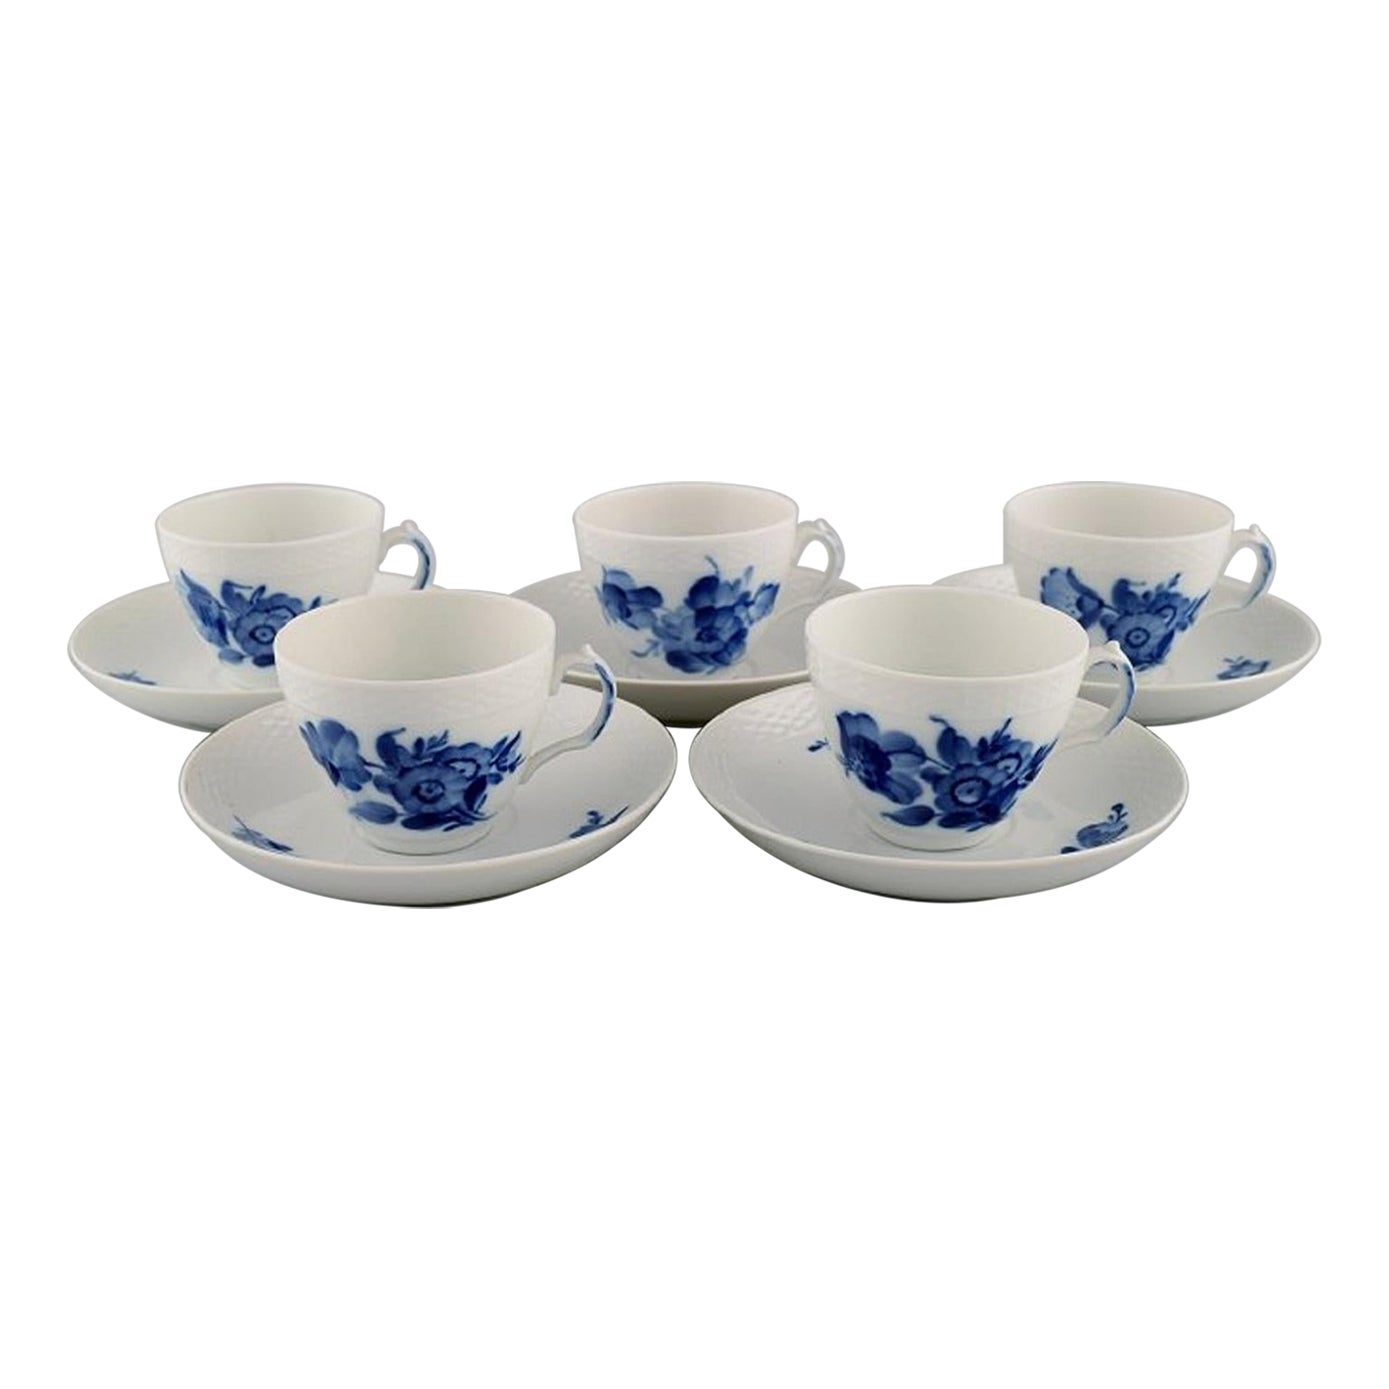 Five Royal Copenhagen Blue Flower Braided Coffee Cups with Saucers, Mid 20th C For Sale